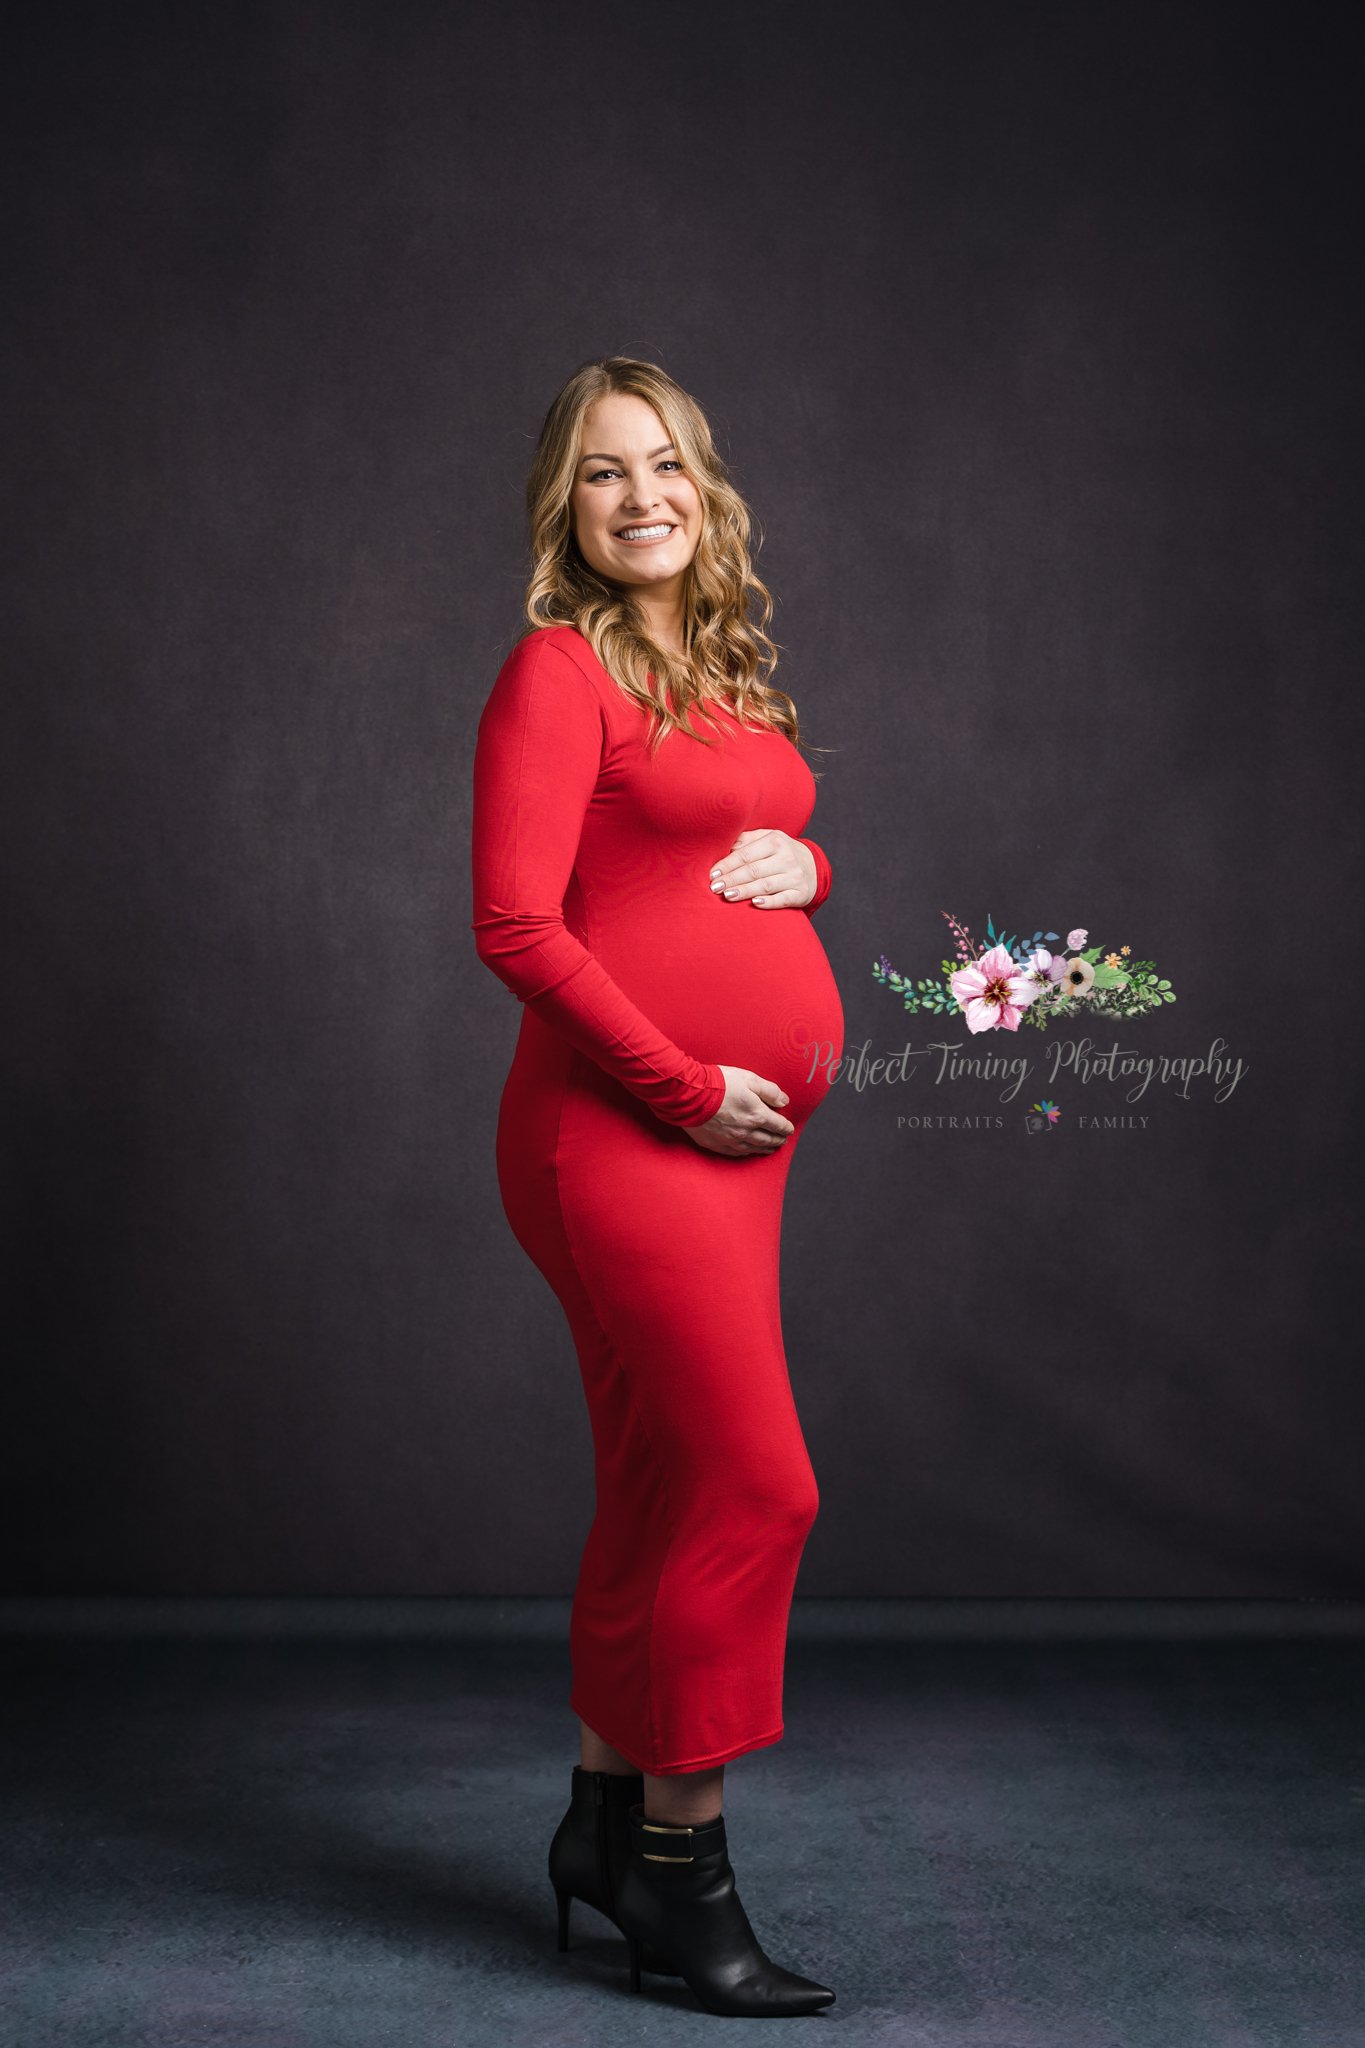 Maternity_Perfect Timing Photography_004.jpg